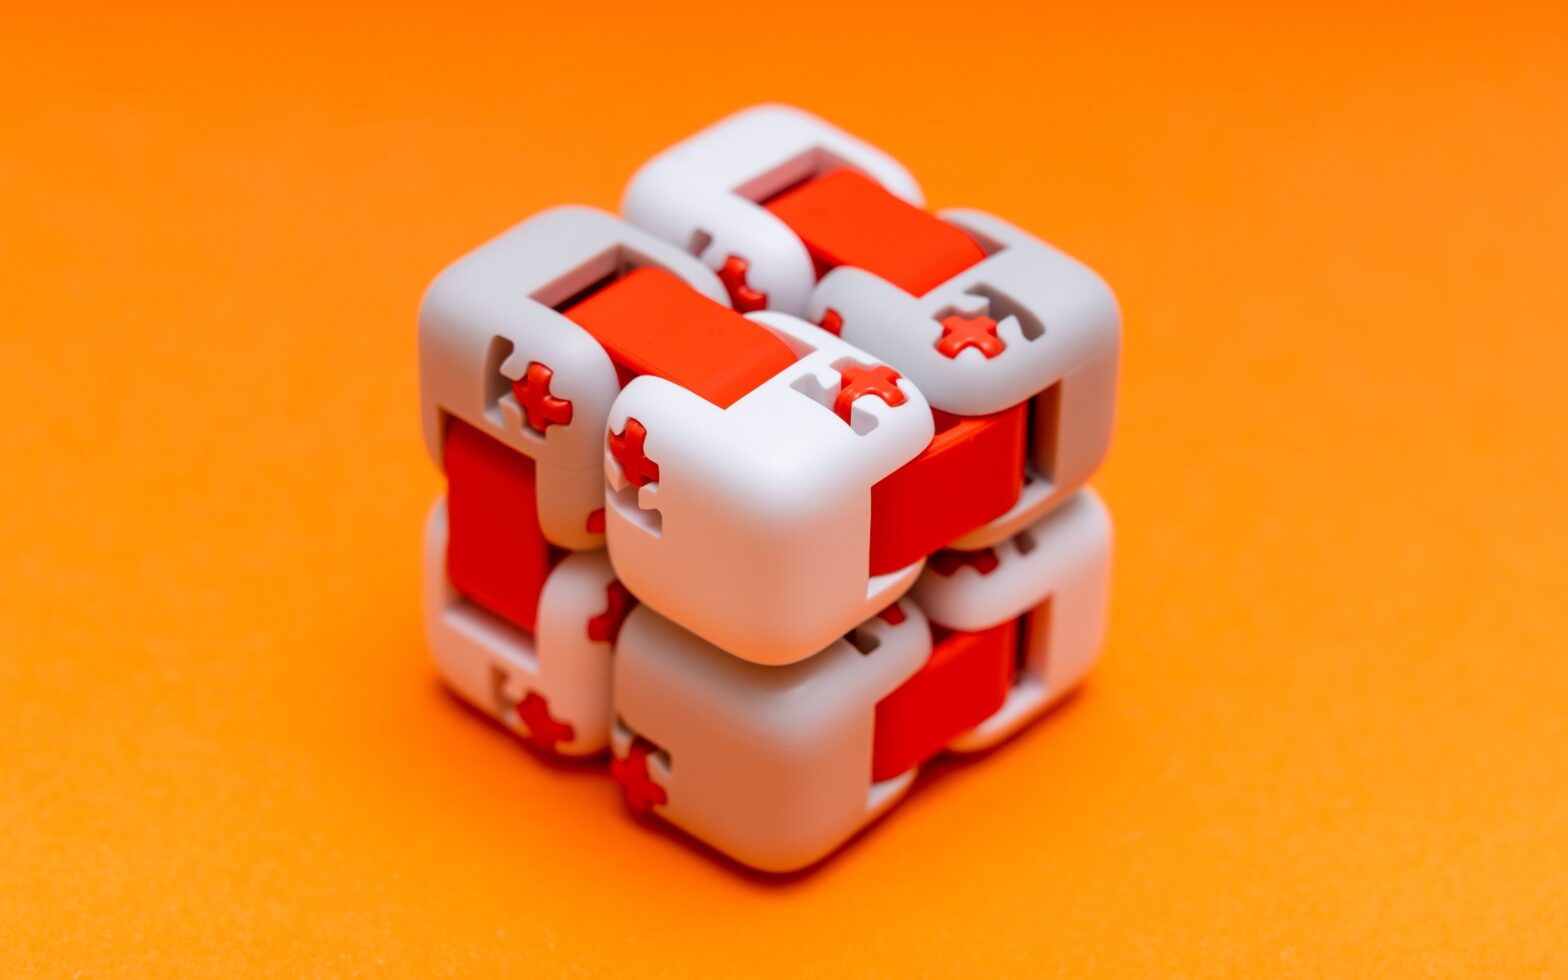 gray and red fidget cube on orange background